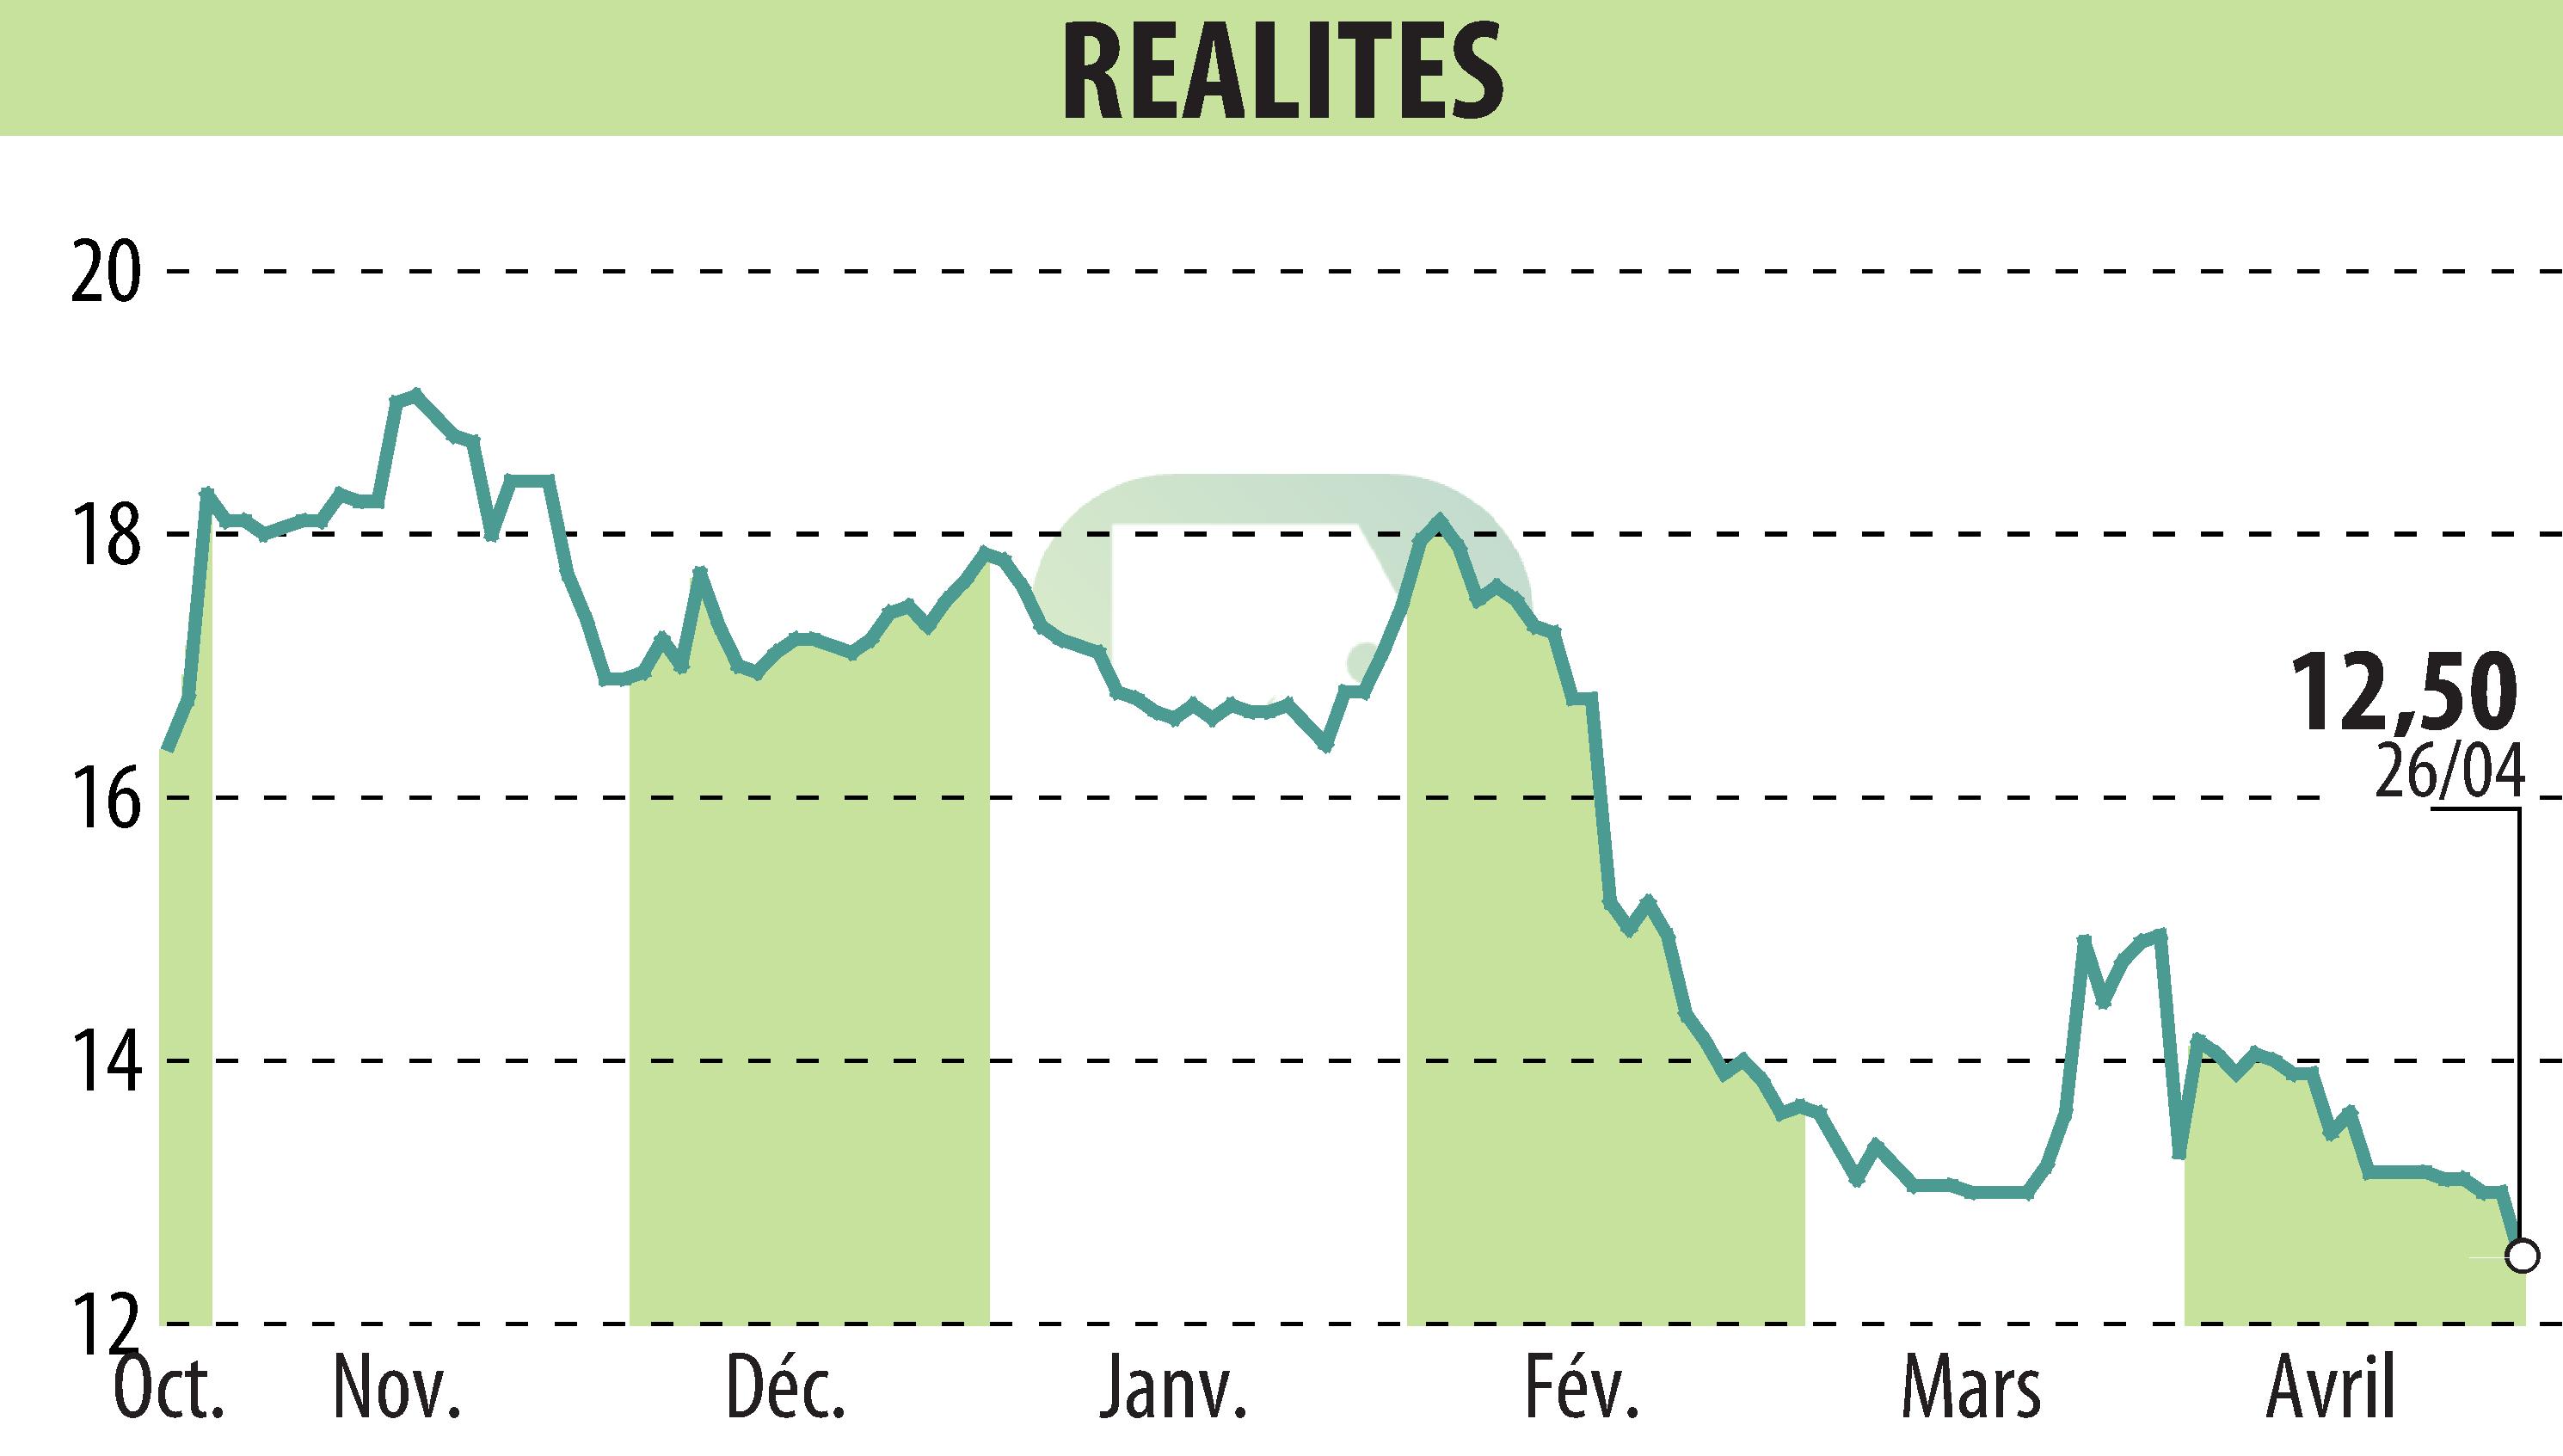 Stock price chart of REALITES (EPA:ALREA) showing fluctuations.